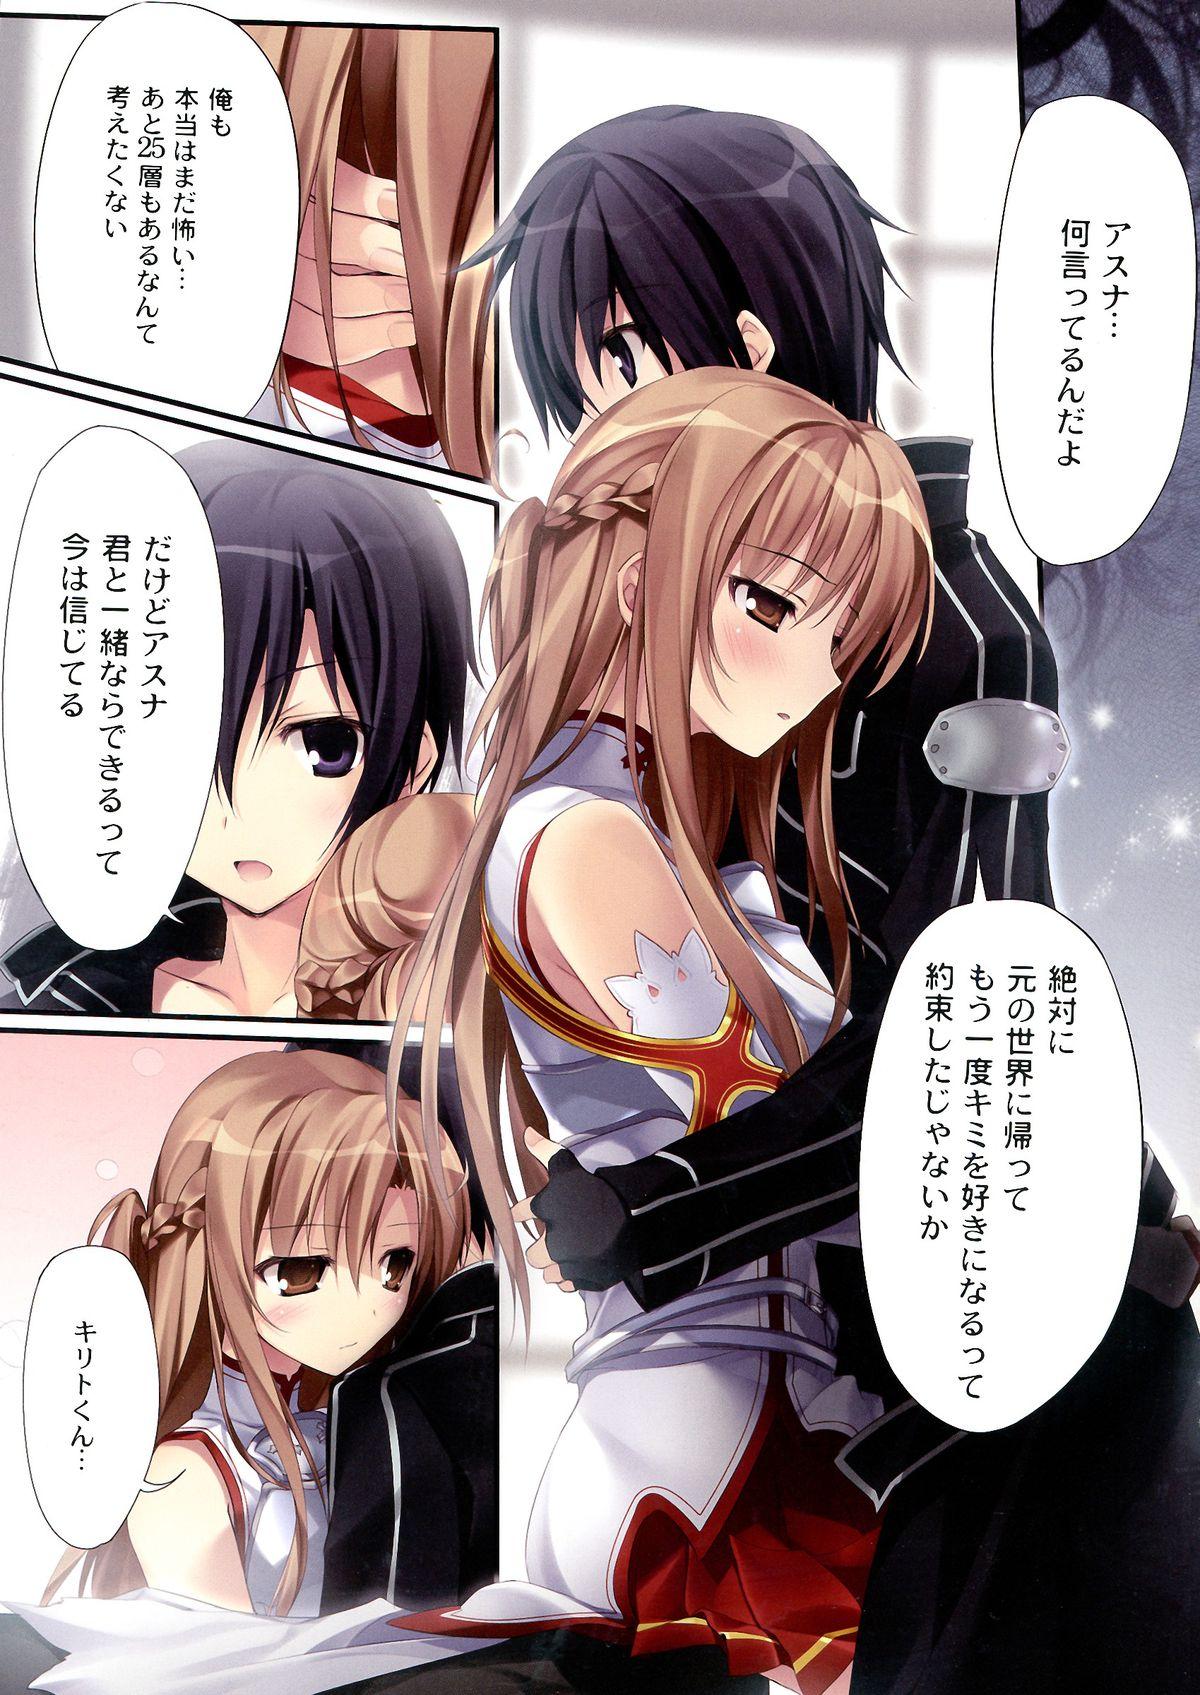 Baile KARORFUL MIX EX9 - Sword art online Toes - Page 5